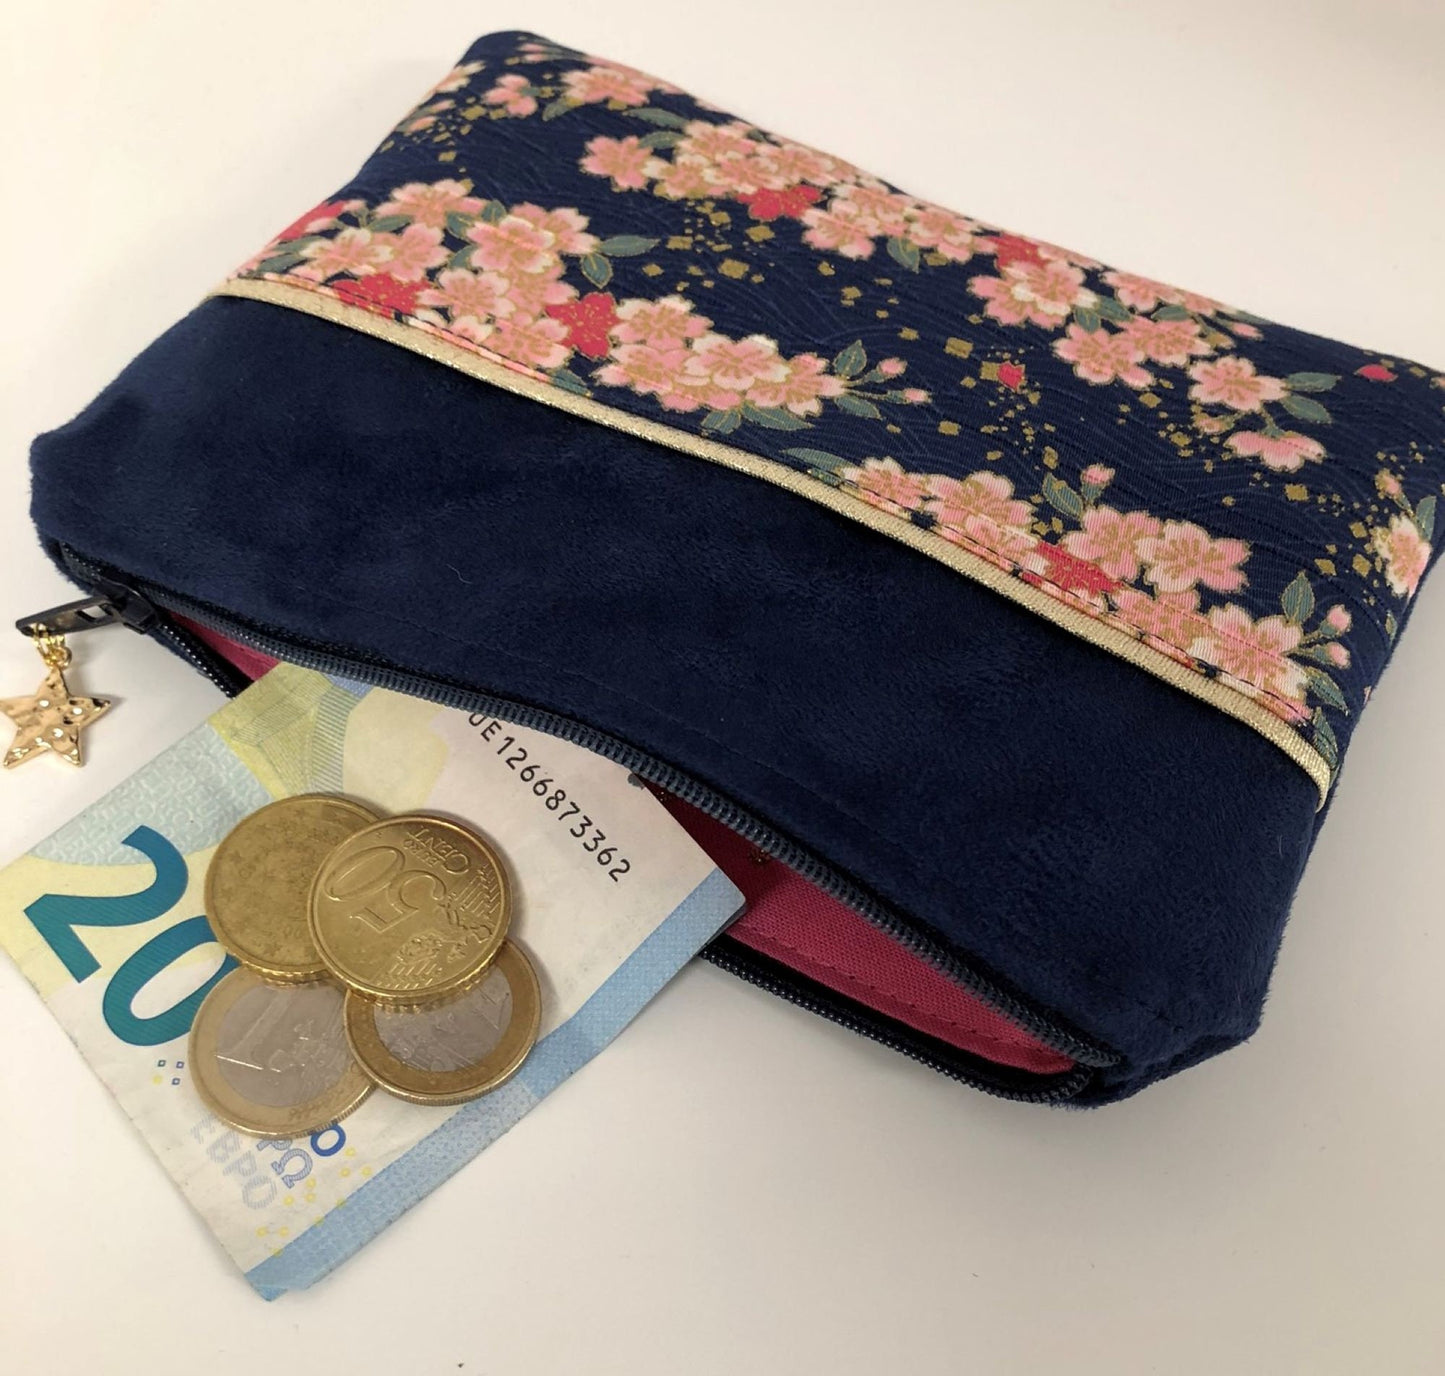 Navy blue and gold purse in Japanese cherry blossom fabric